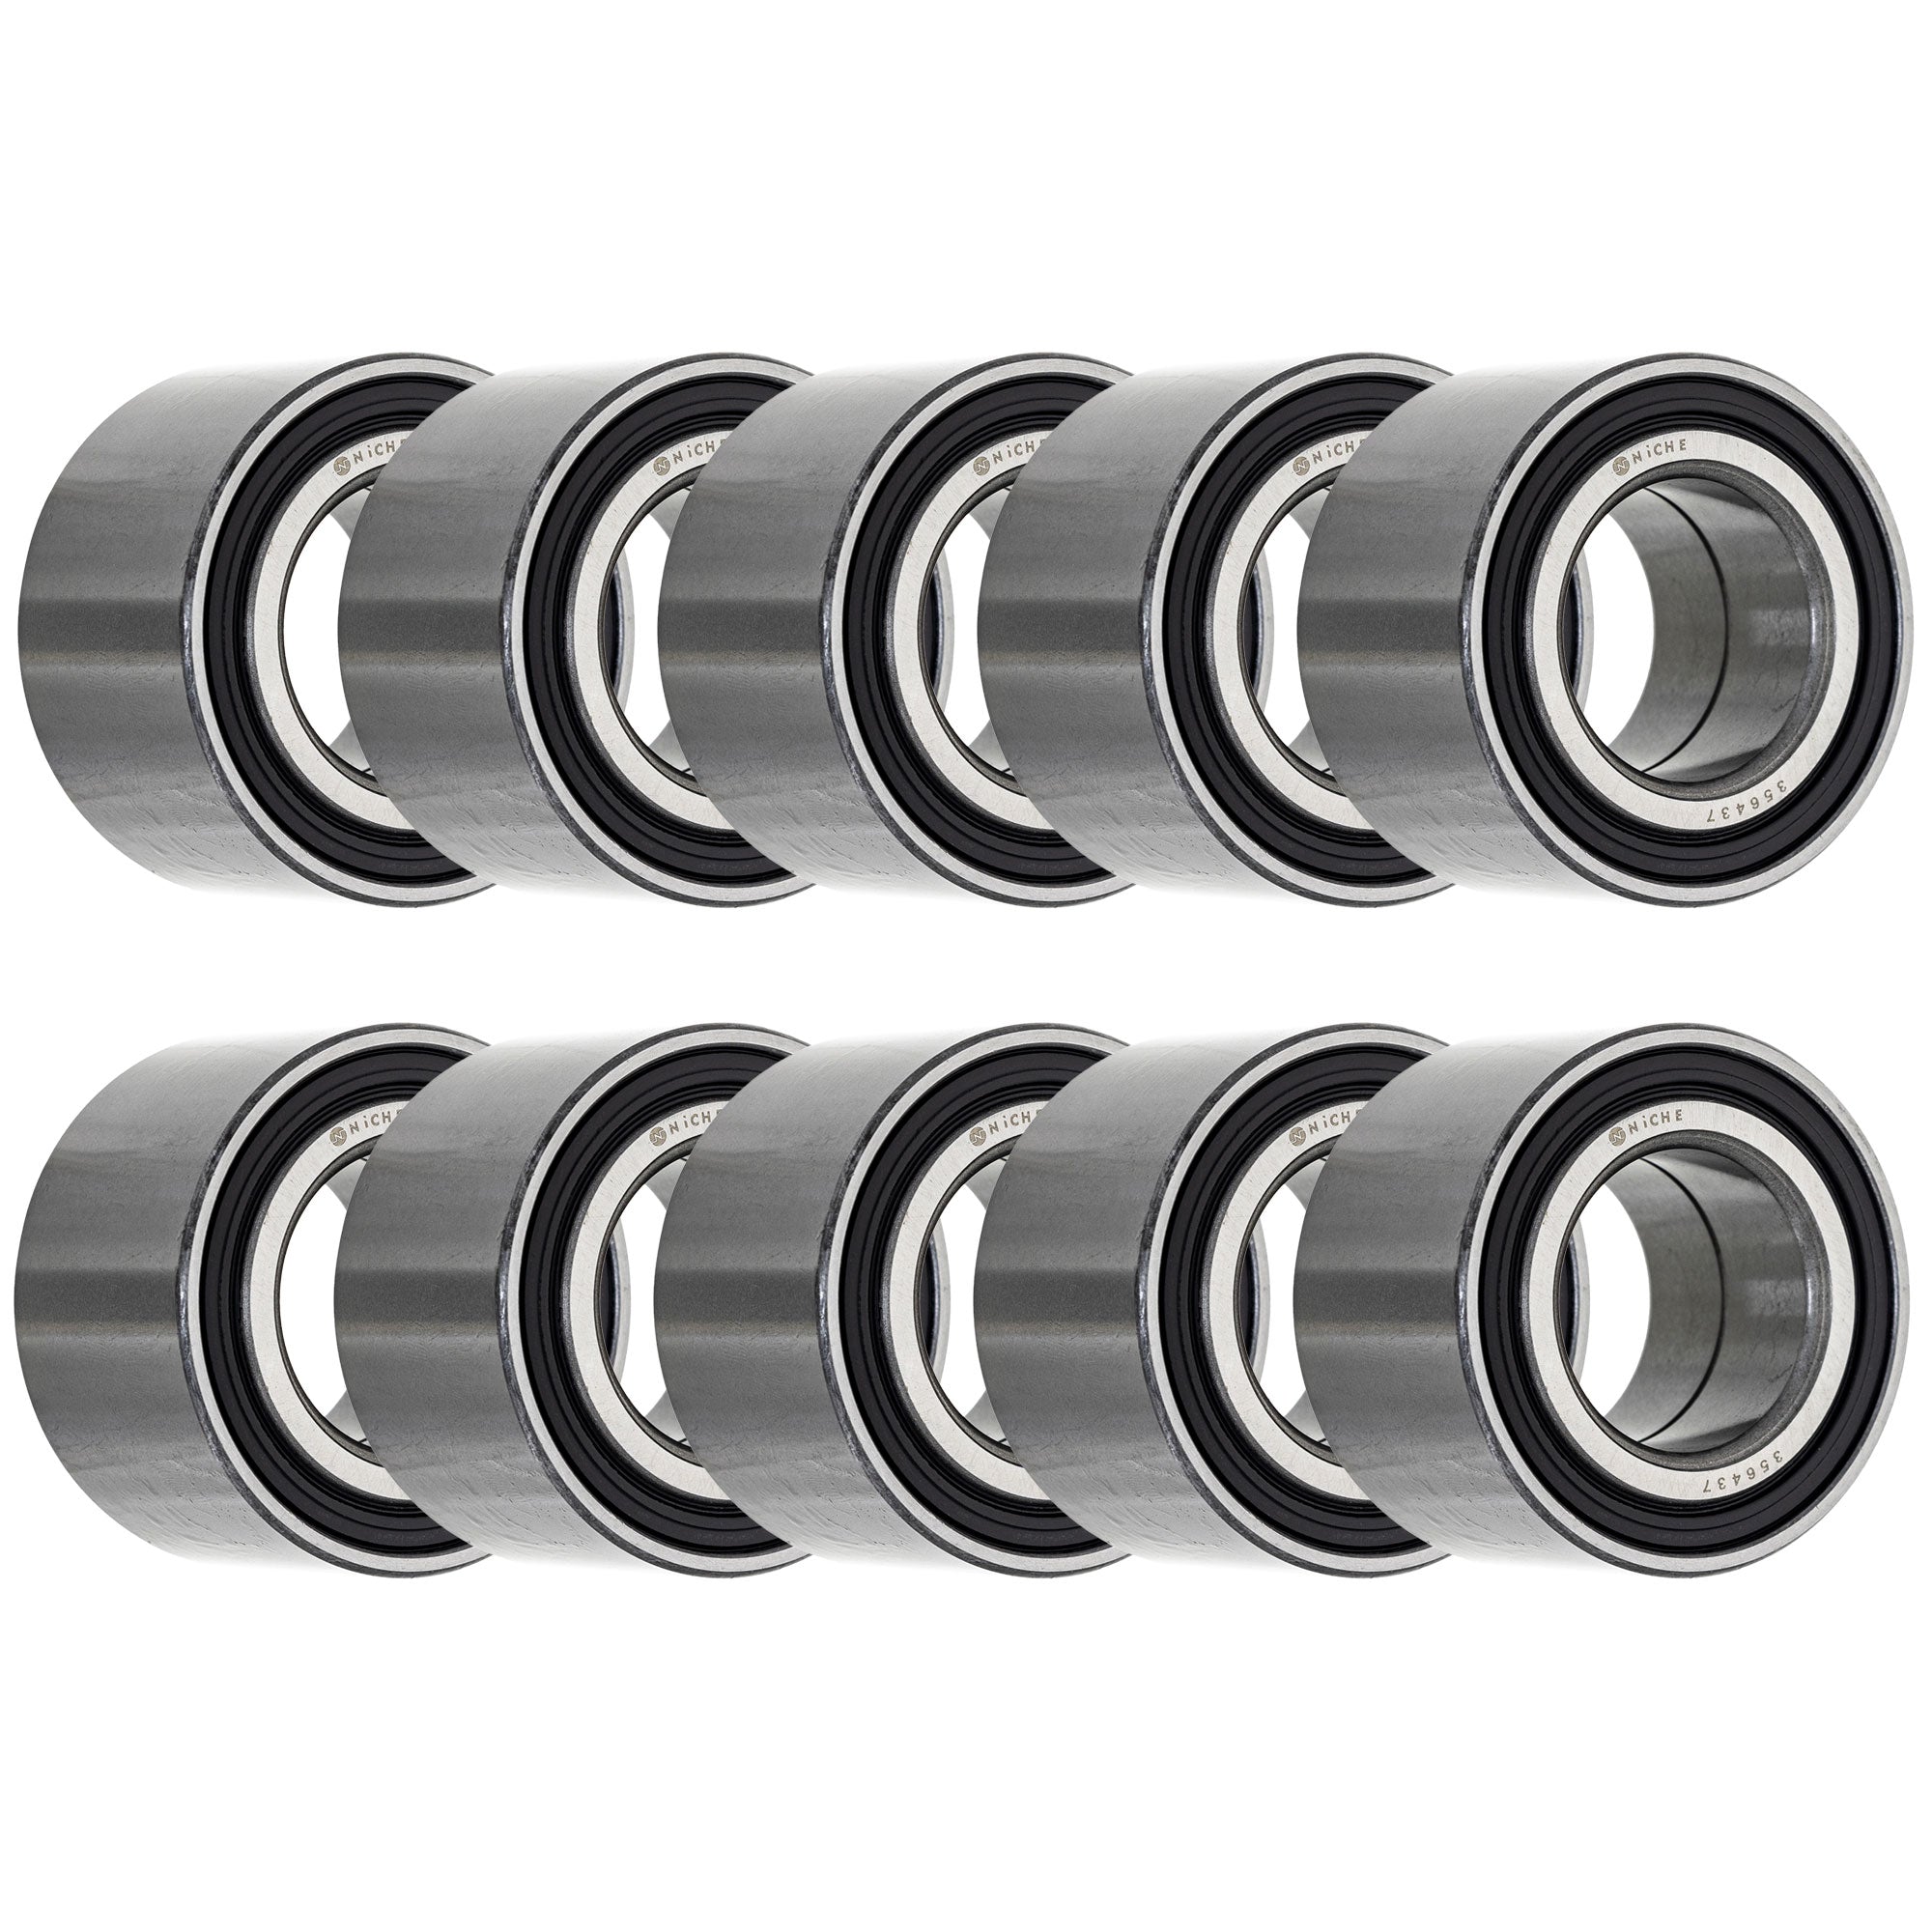 Double Row, Angular Contact, Ball Bearing Pack of 10 10-Pack for zOTHER GEM Trail-Blazer NICHE 519-CBB2283R